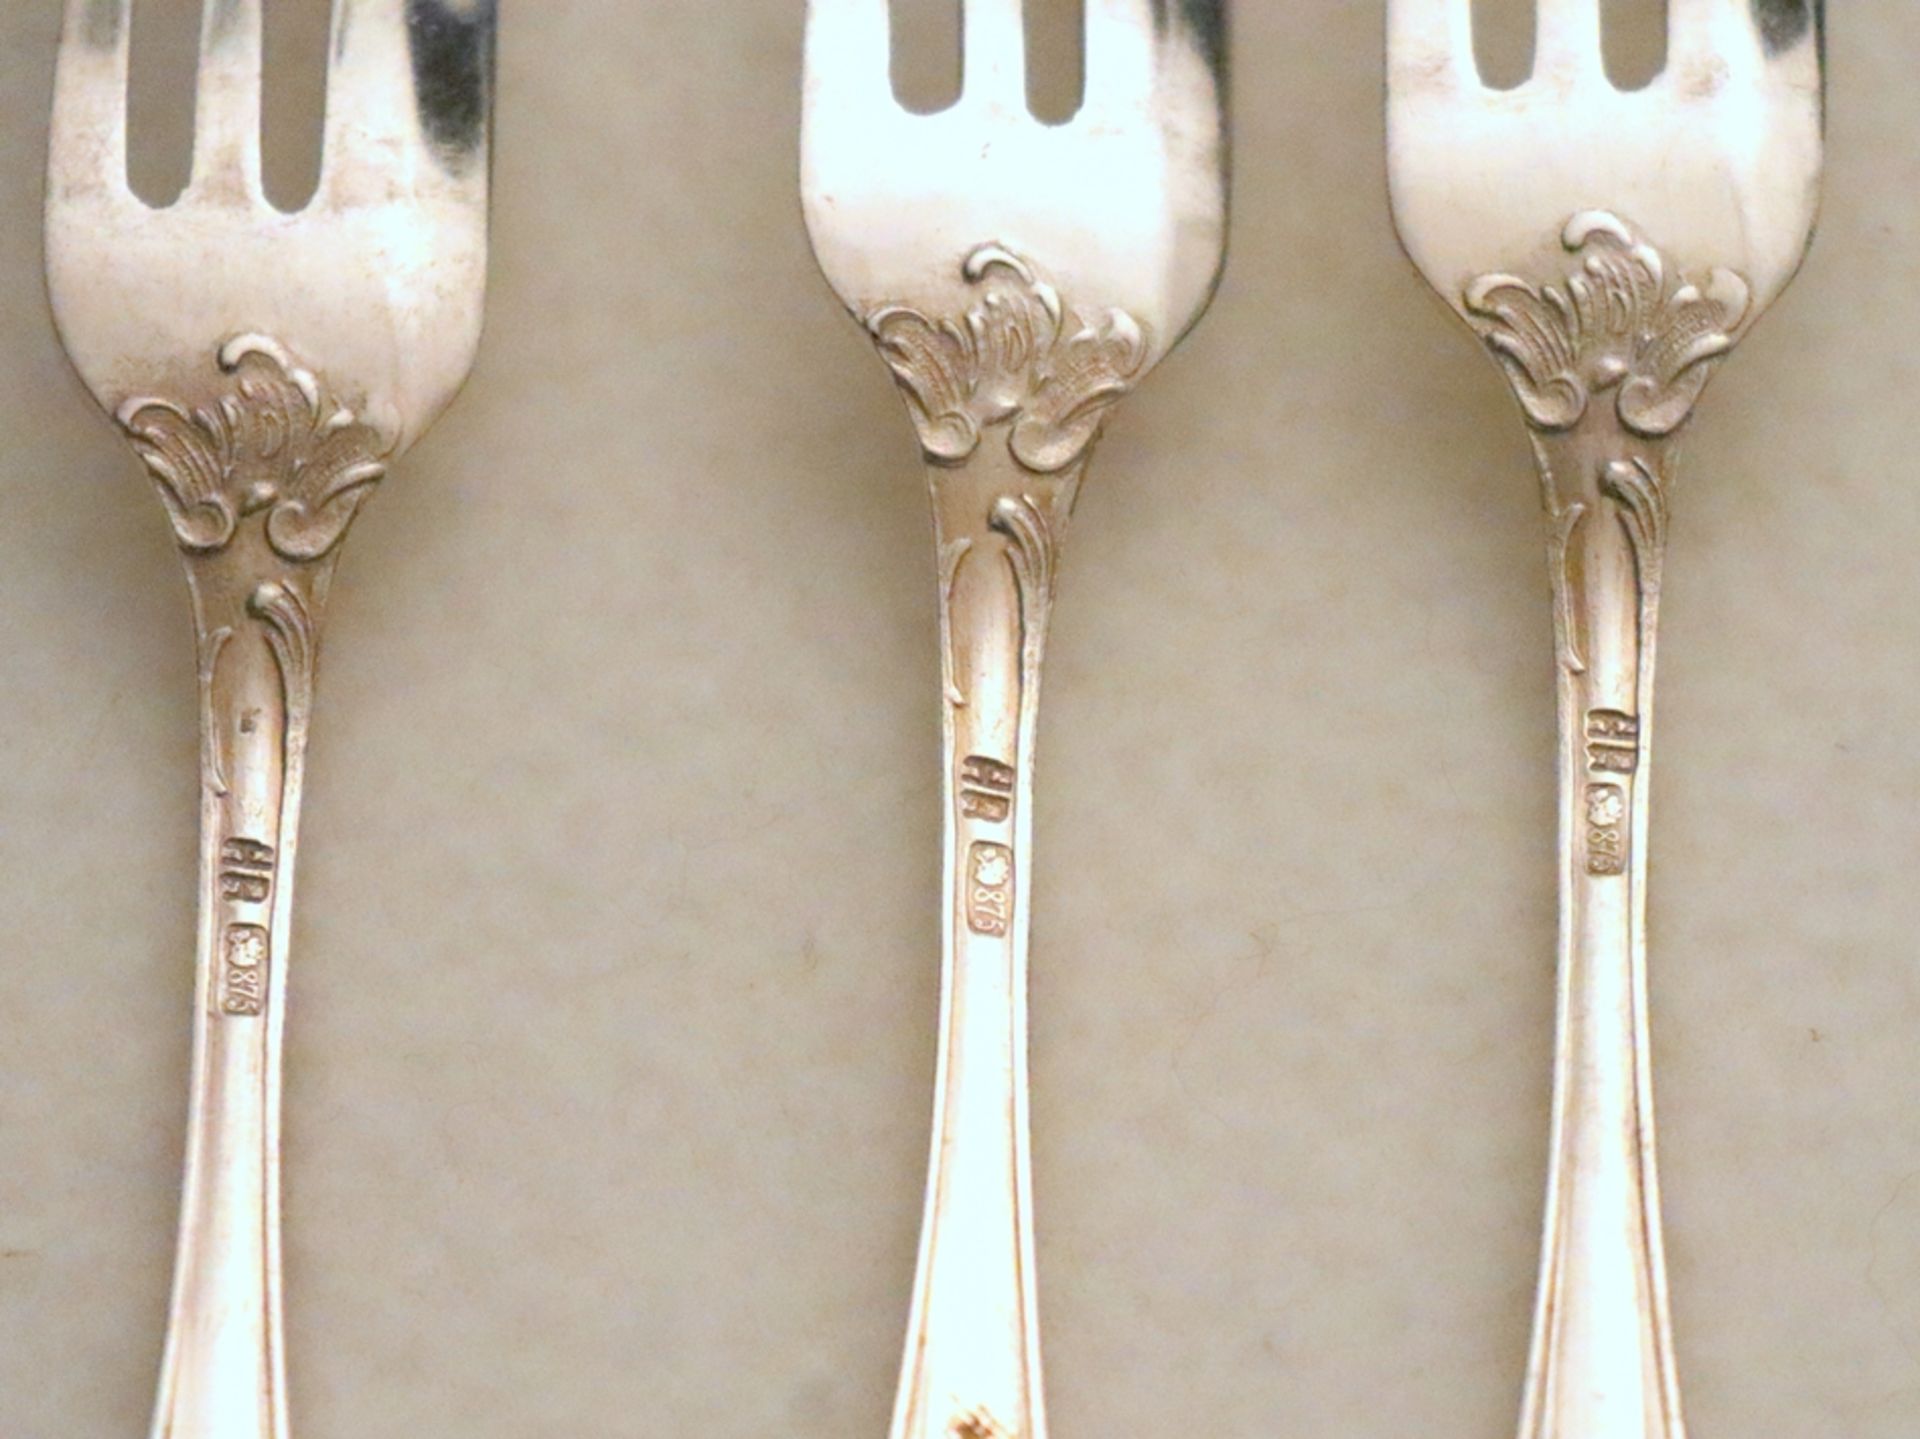 Convolute silver cutlery 875s, around 1890 to 1920 - Image 2 of 4